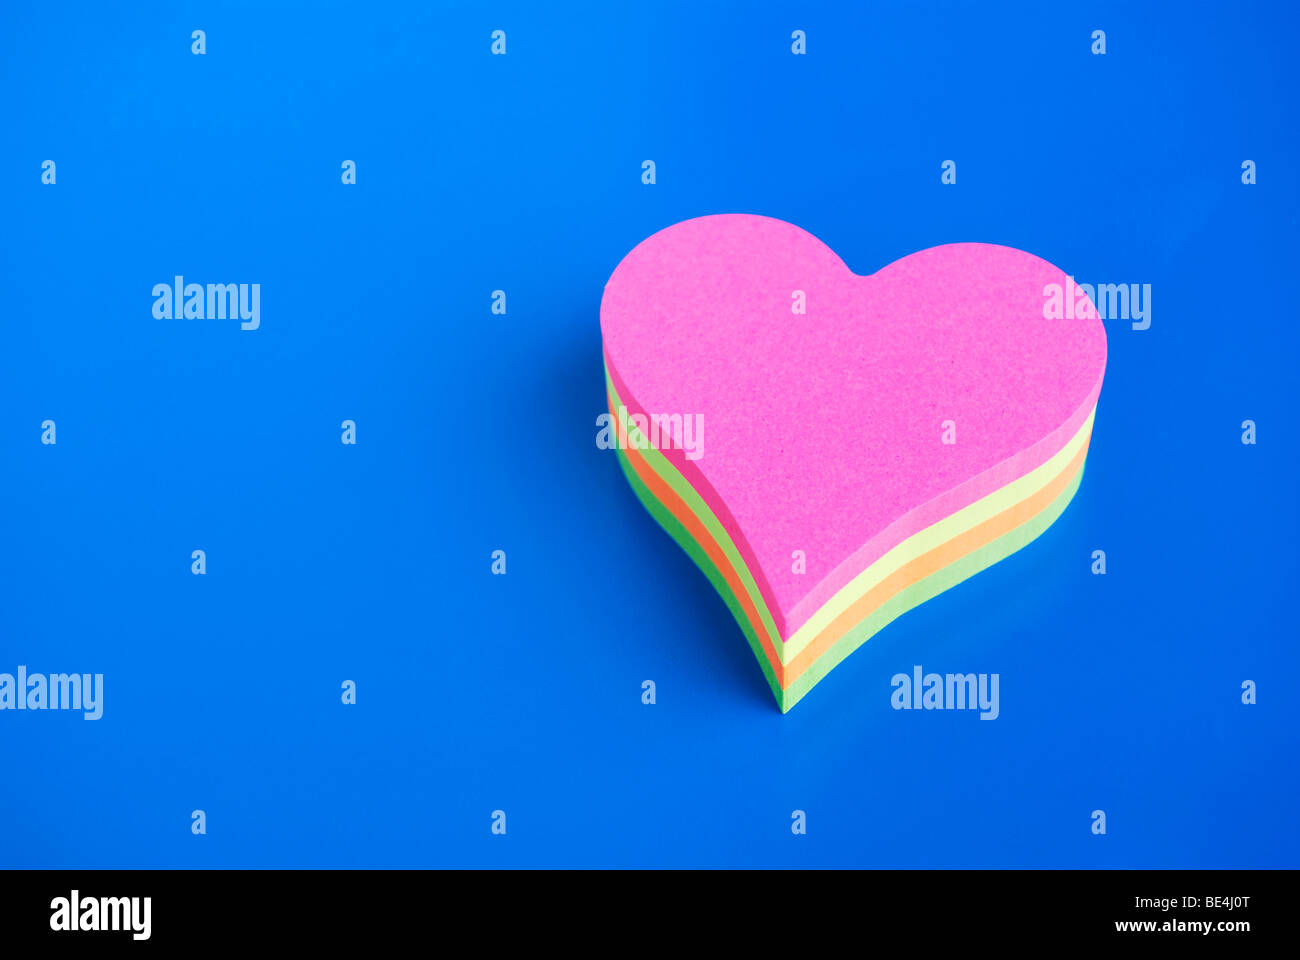 Notepad, heart-shaped, different coloured pieces of paper Stock Photo